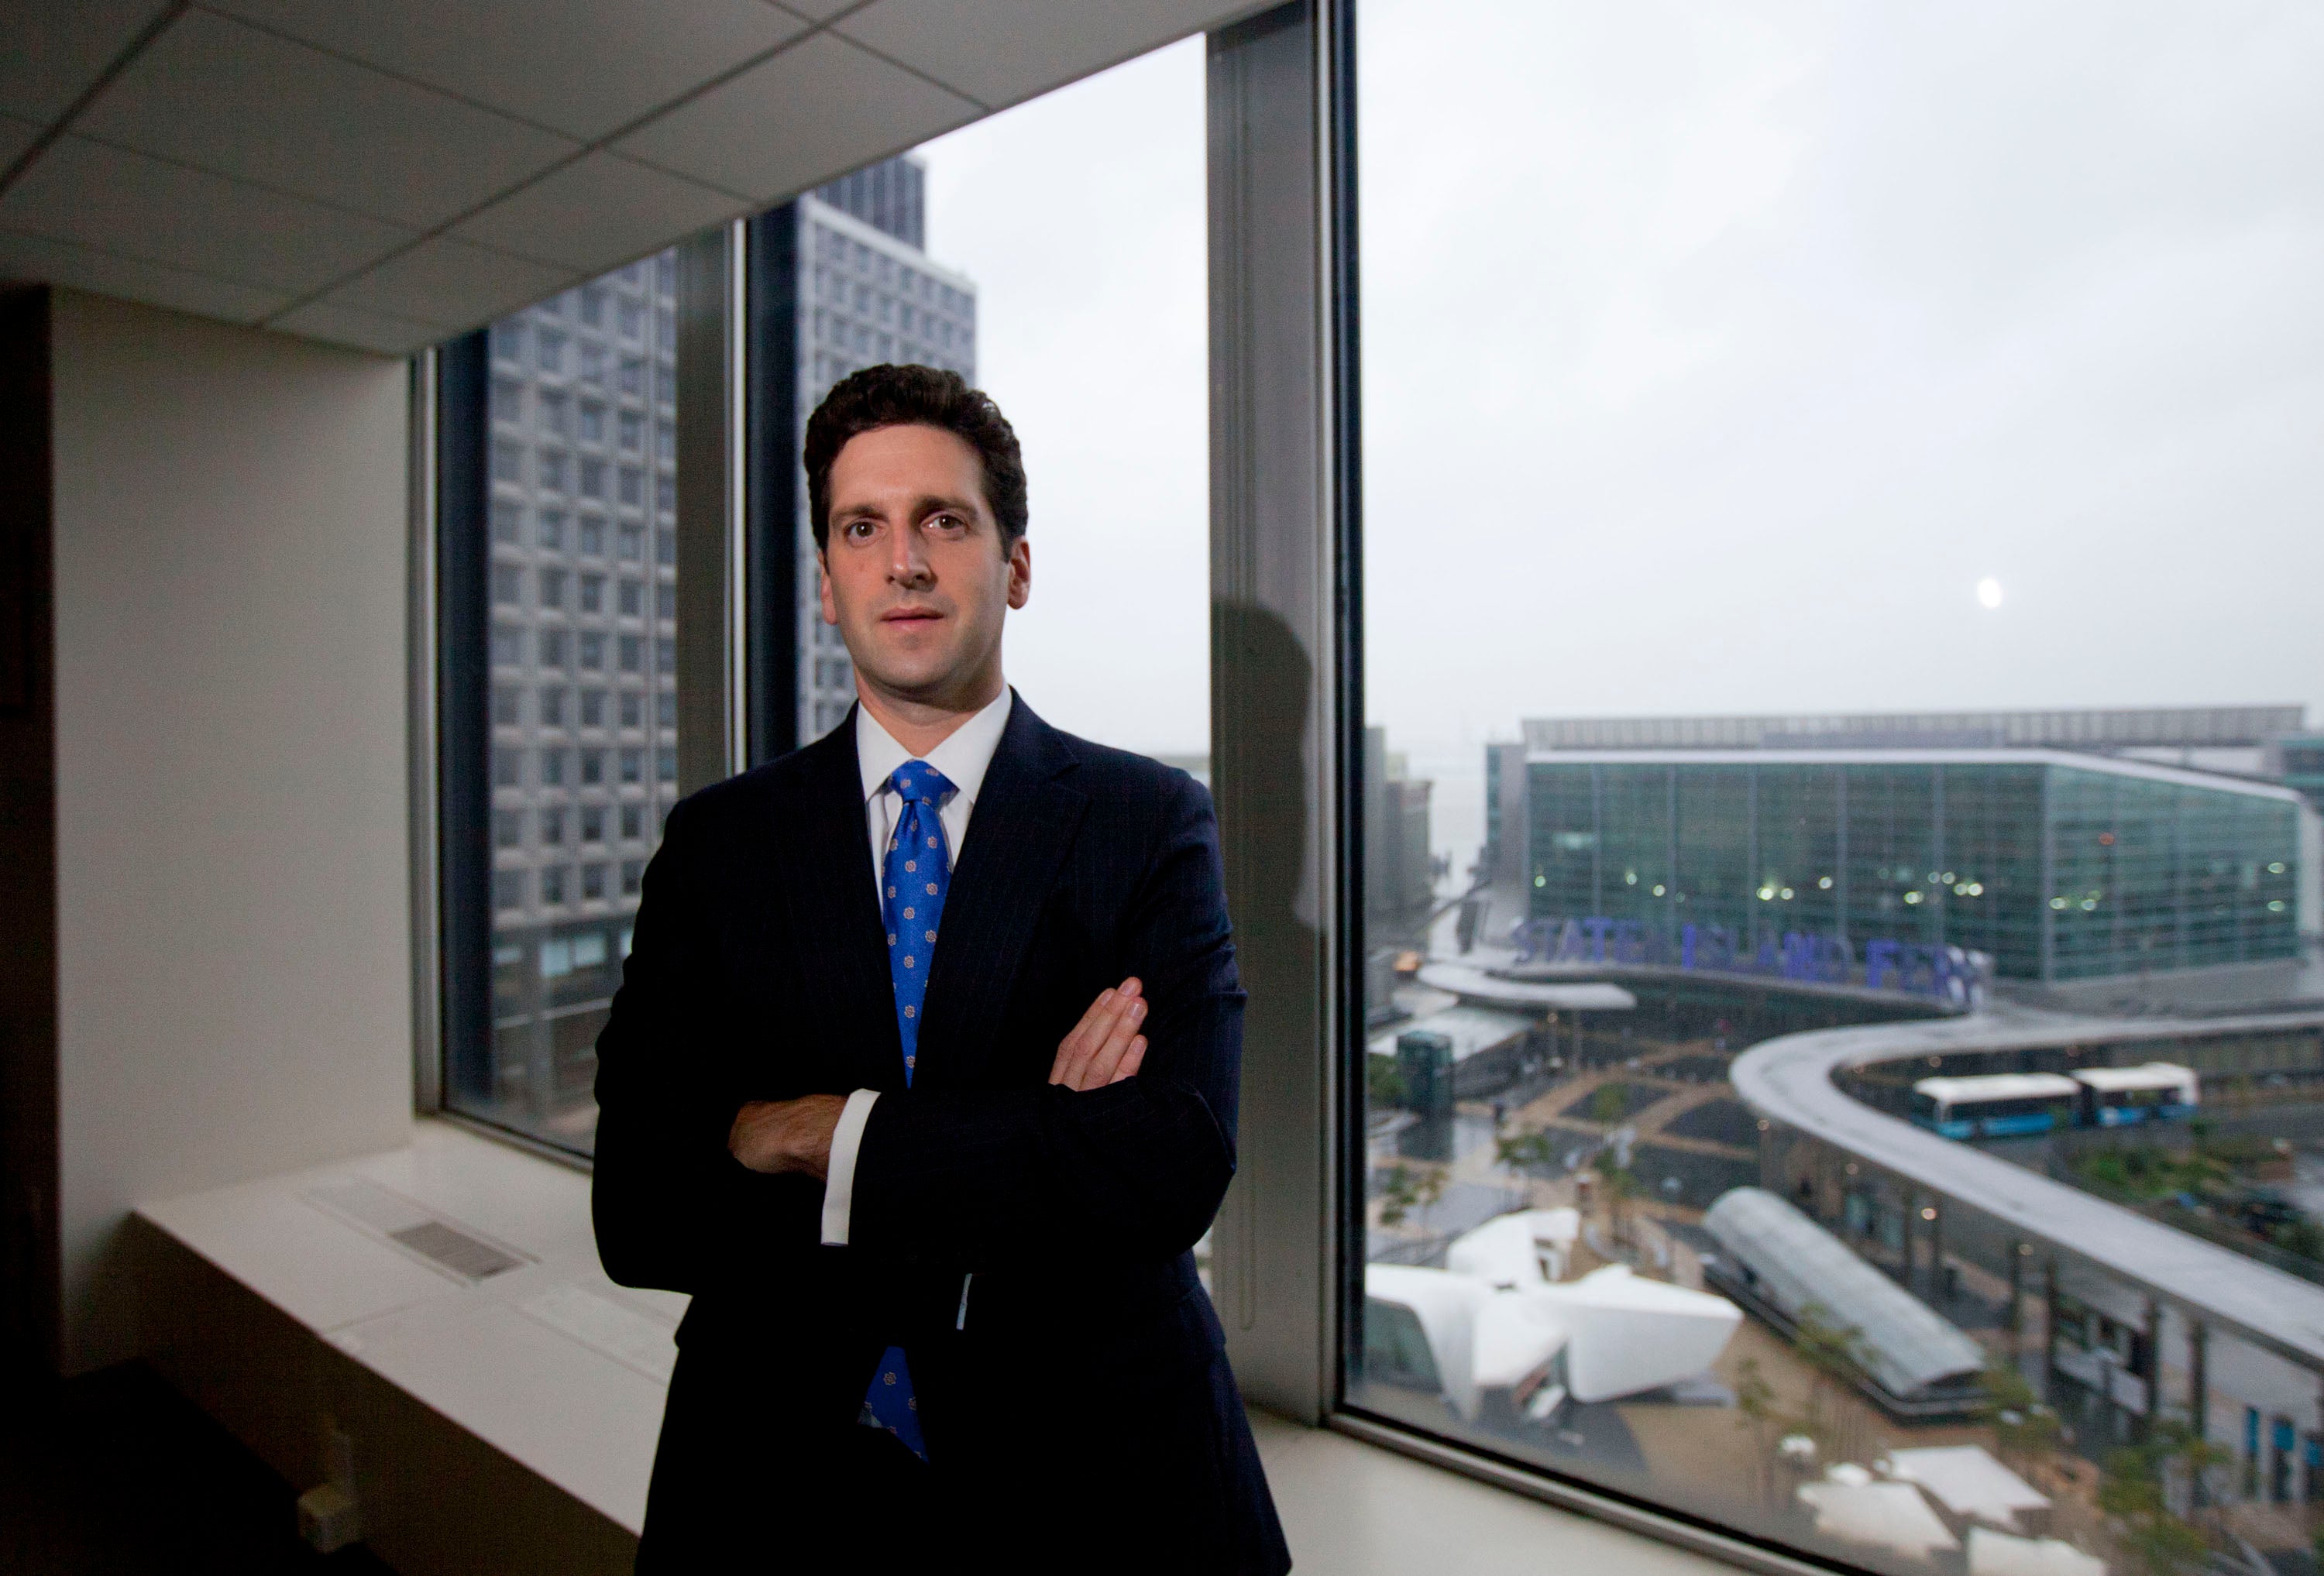 Benjamin Lawsky has huge powers over foreign banks that outweigh even his jurisdiction against many US banks